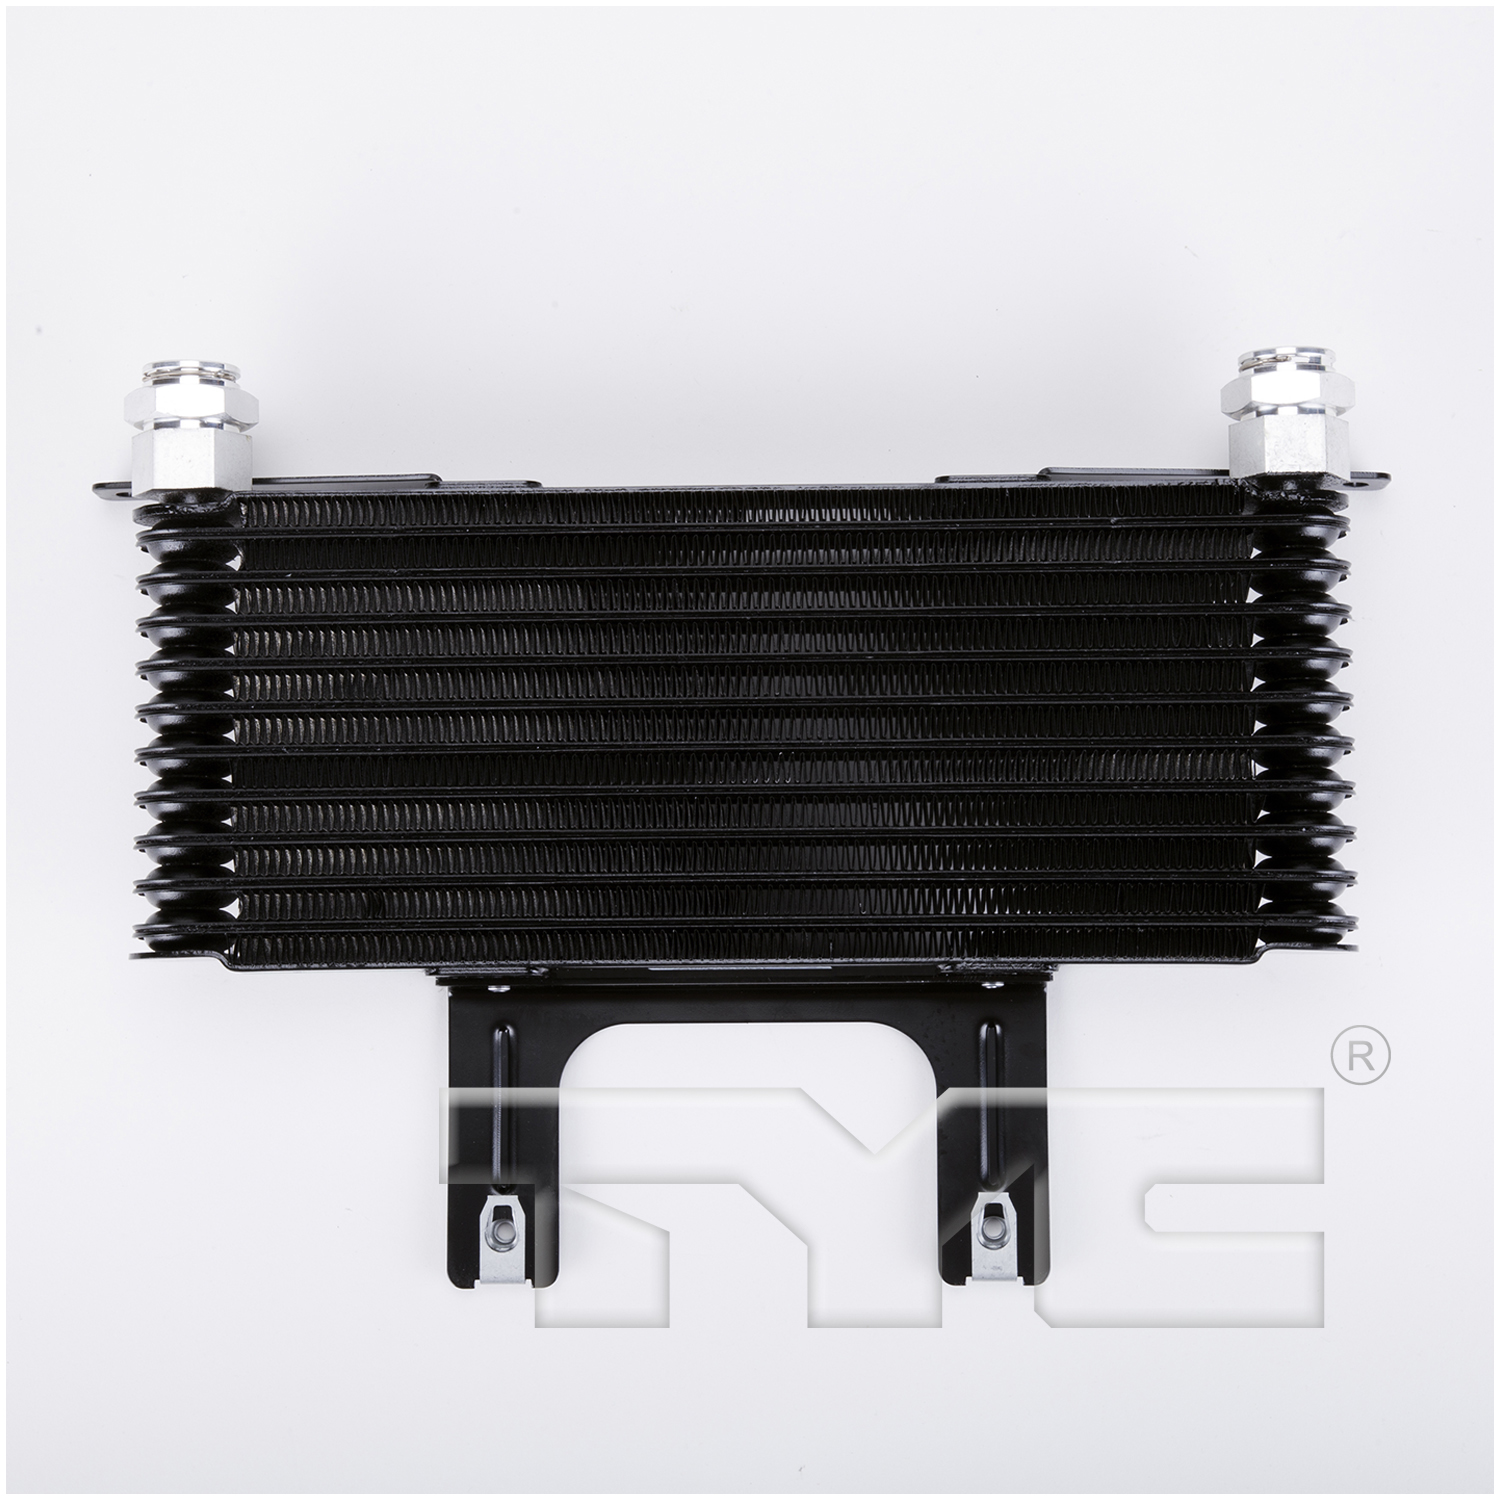 Aftermarket RADIATORS for GMC - SIERRA 3500 CLASSIC, SIERRA 3500 CLASSIC,07-07,Transmission cooler assembly